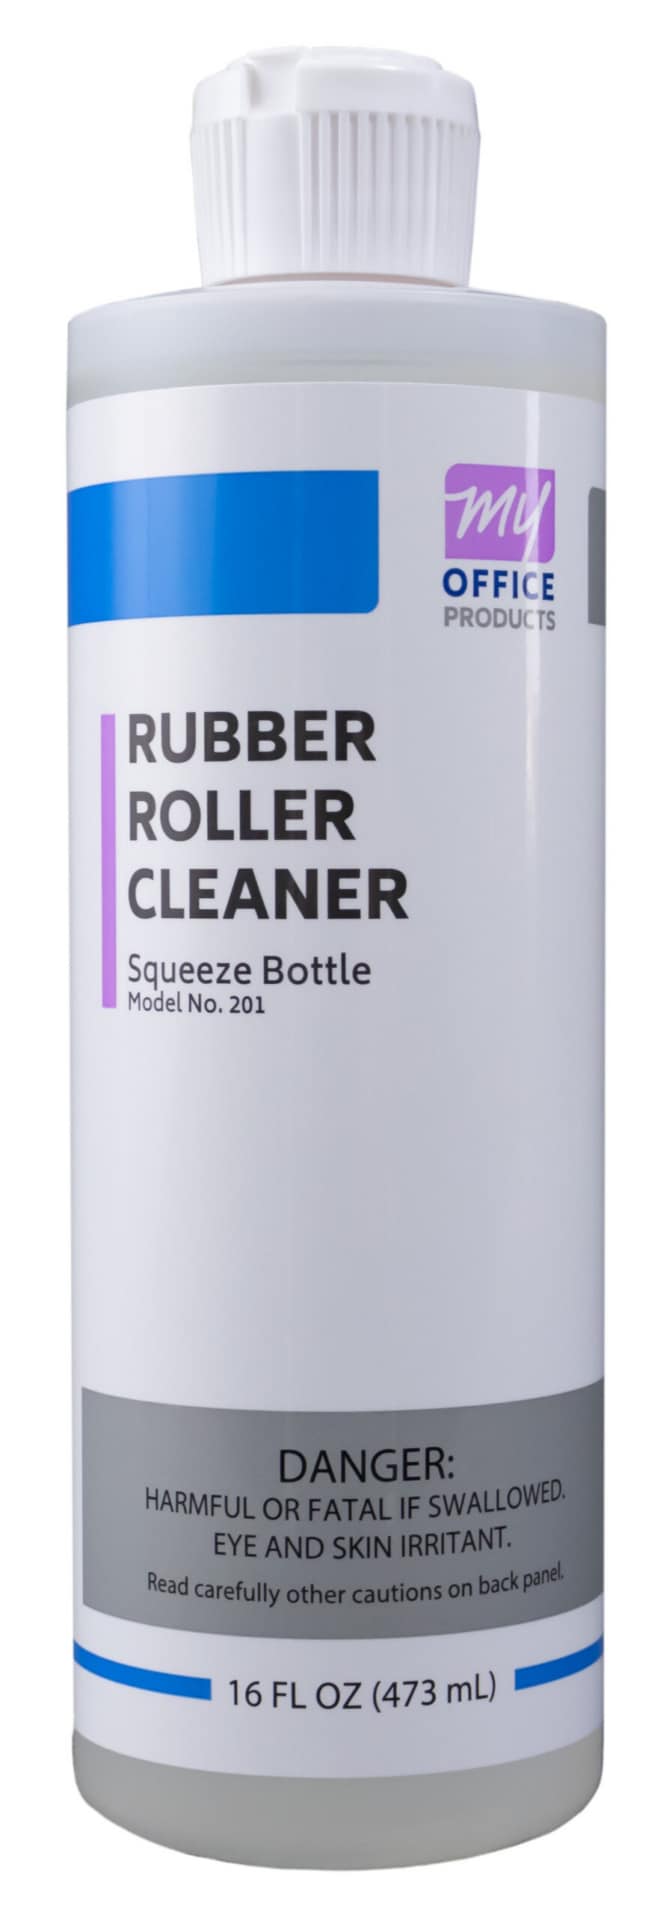 Martin Yale 201 Rubber Roller Cleaner Squeeze Bottle